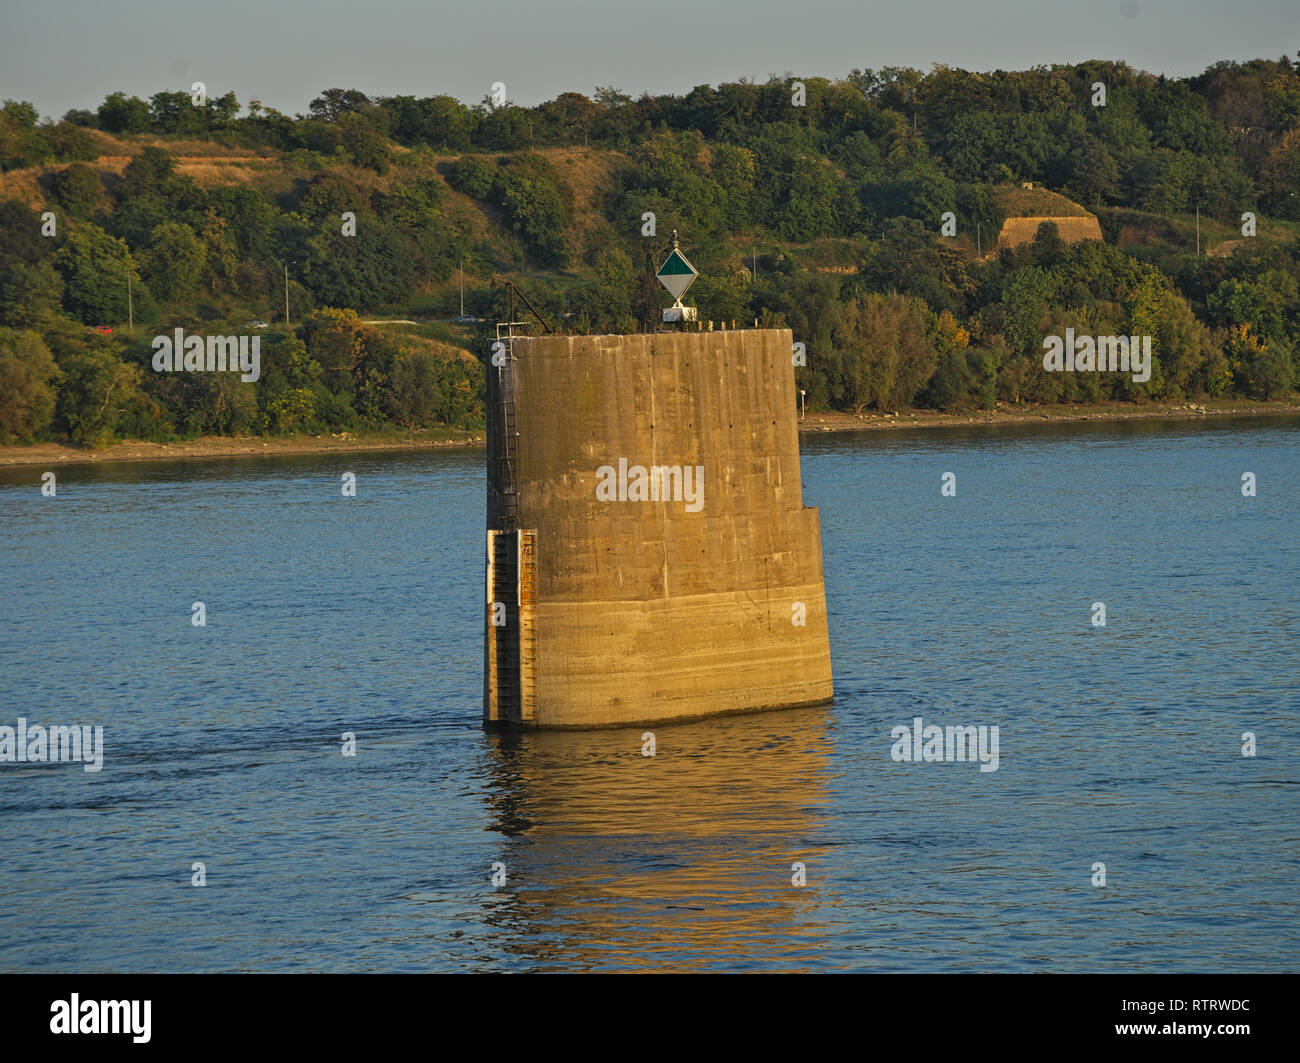 Abandoned old concrete bridge pillar in river with other side behind Stock Photo